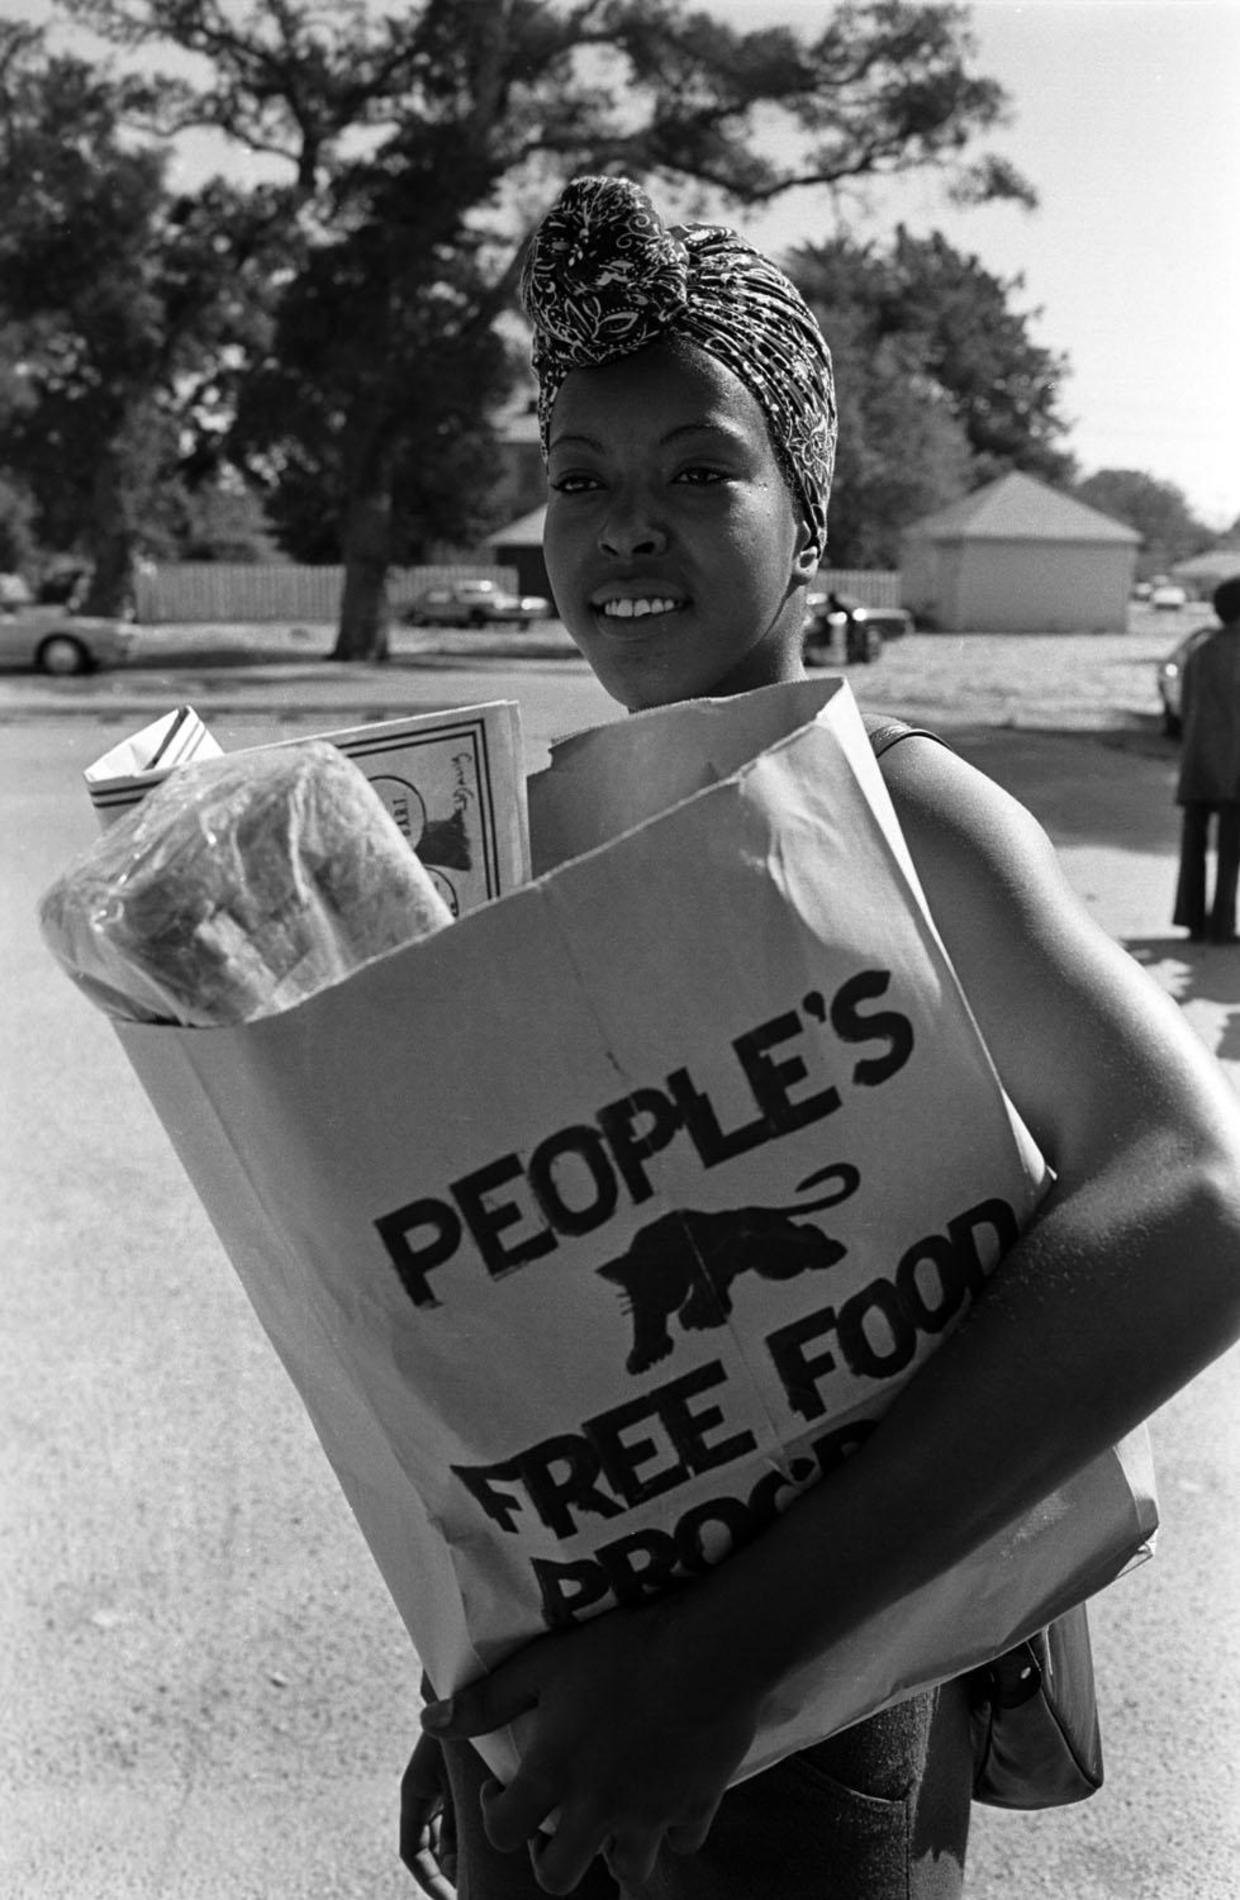 © 2017, STEPHEN SHAMES, FROM THE BOOK "POWER TO THE PEOPLE: THE WORLD OF THE BLACK PANTHERS" (ABRAMS)